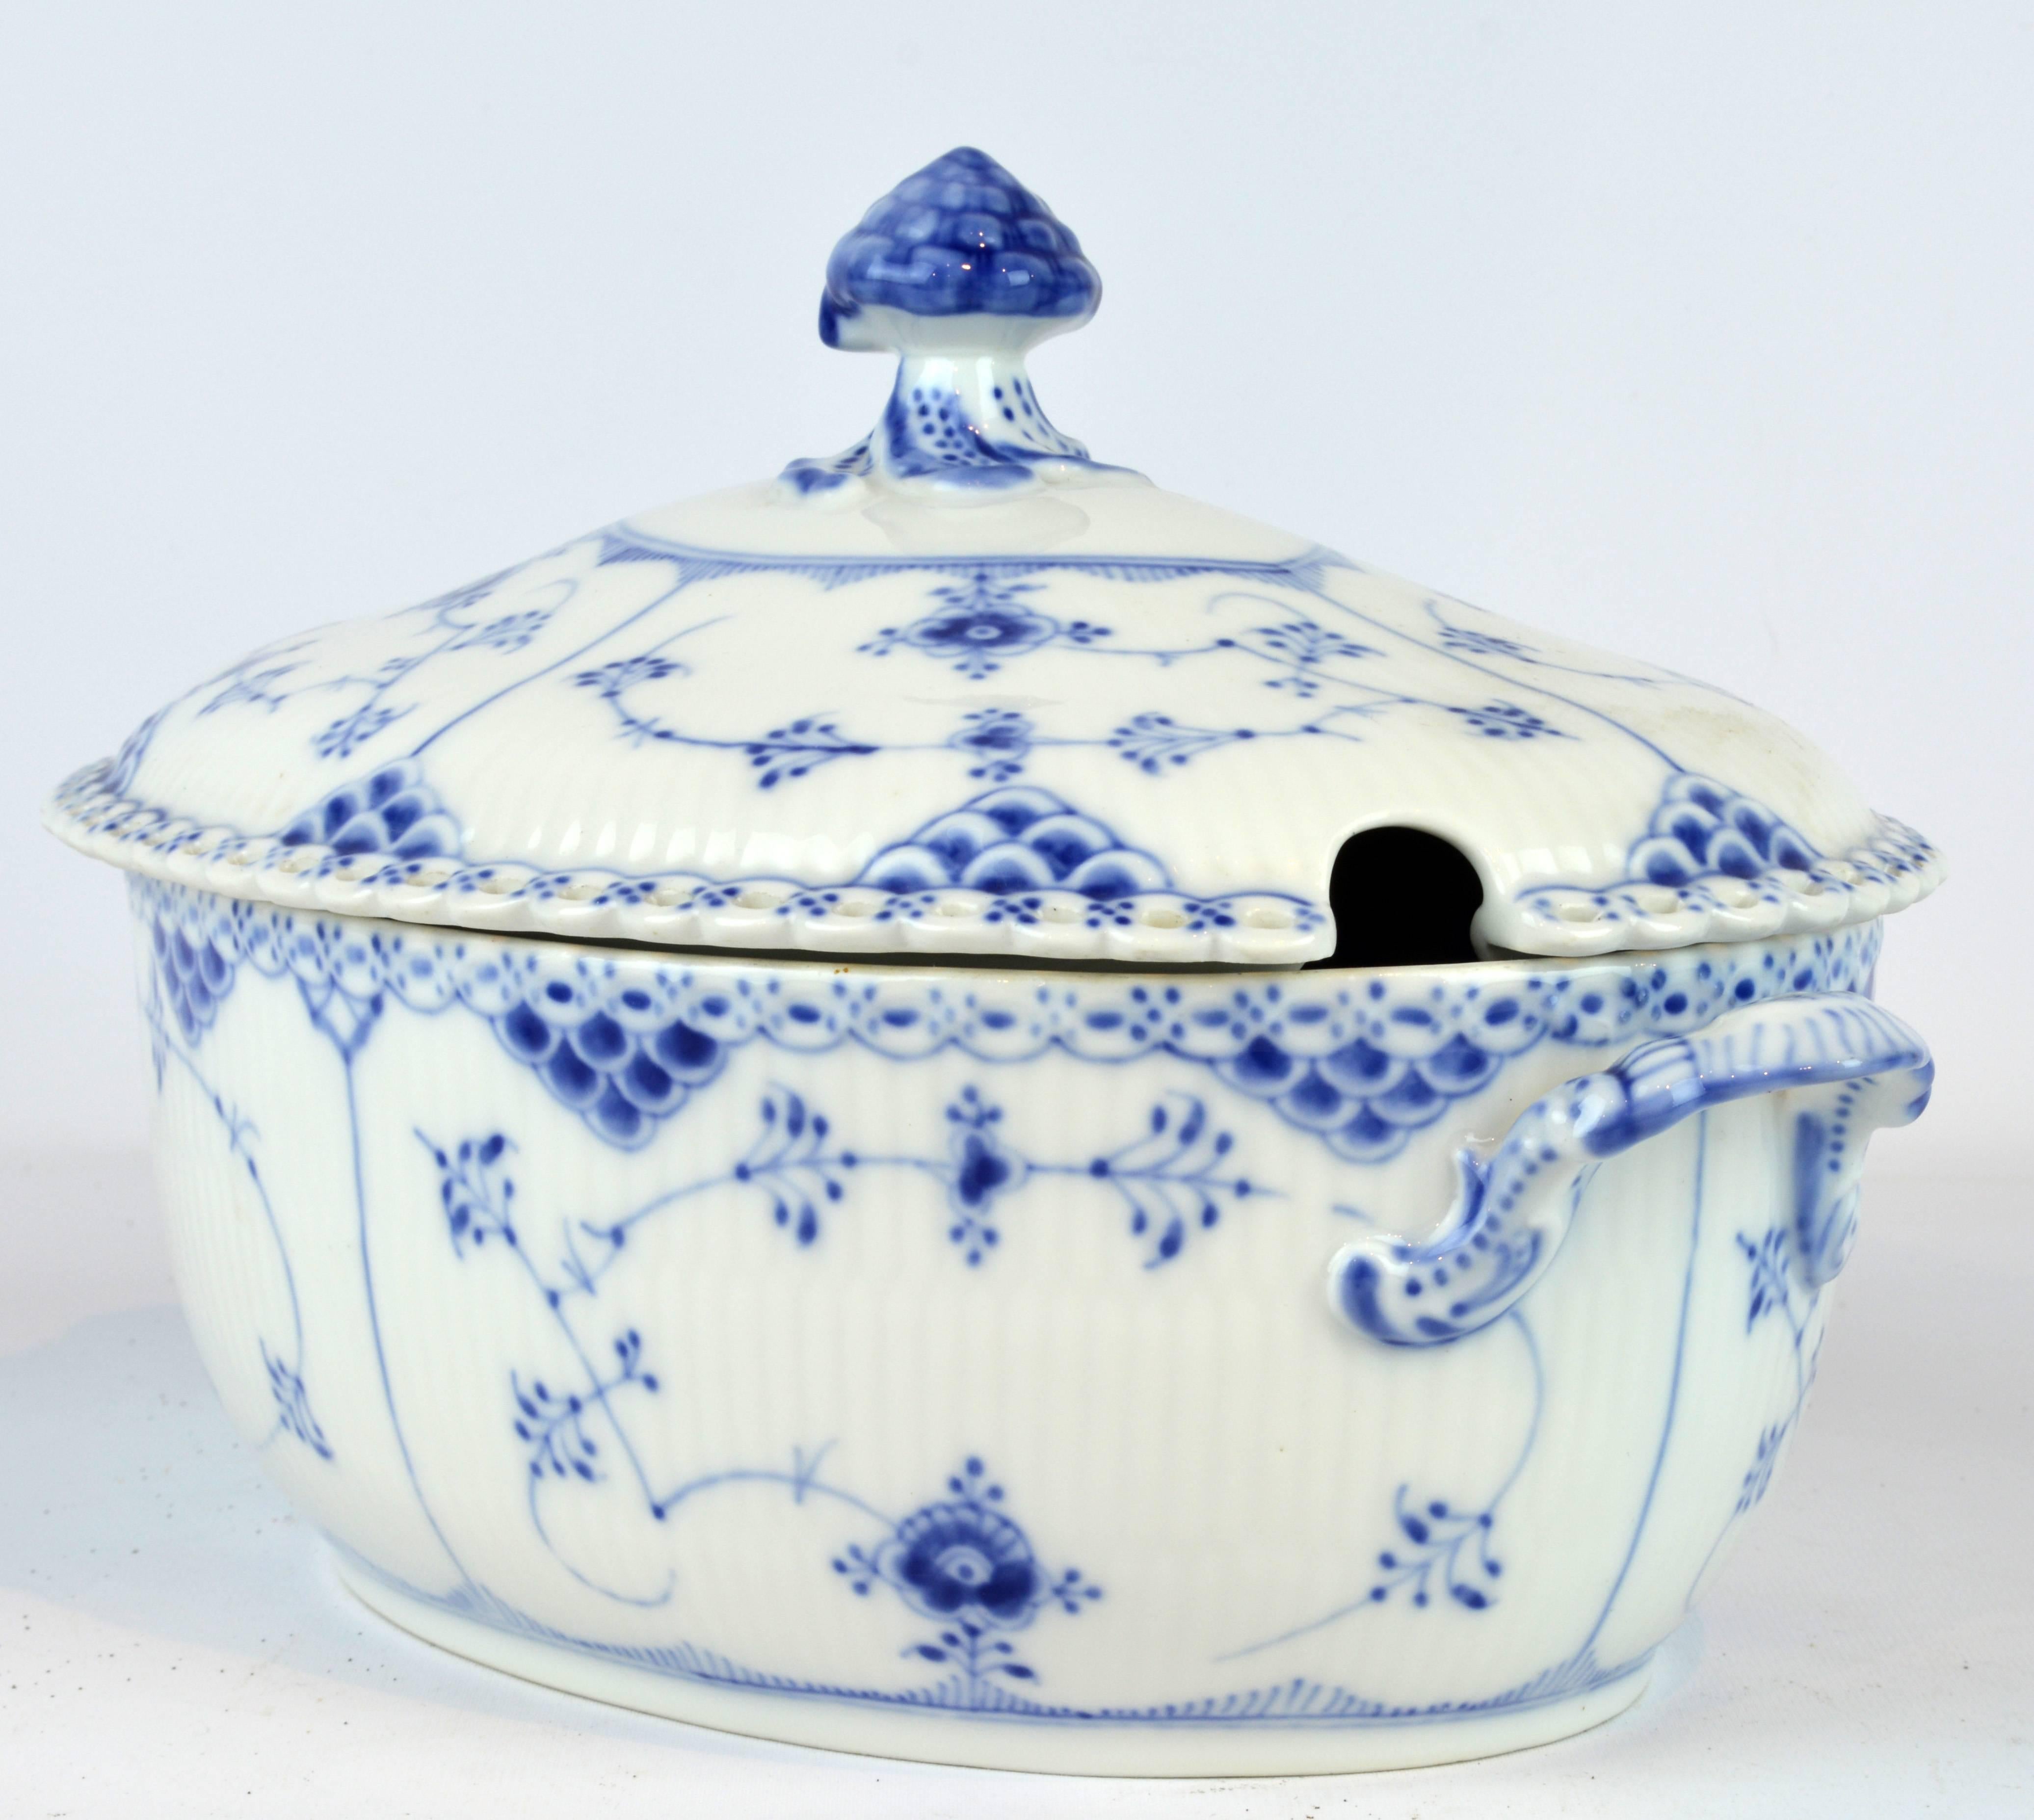 Large Royal Copenhagen blue fluted full lace tureen, factory first #1109. Measures: W 11.5 inches, D 8.5 inches, H 7.5 inches. No chips, cracks, hairlines or repairs.